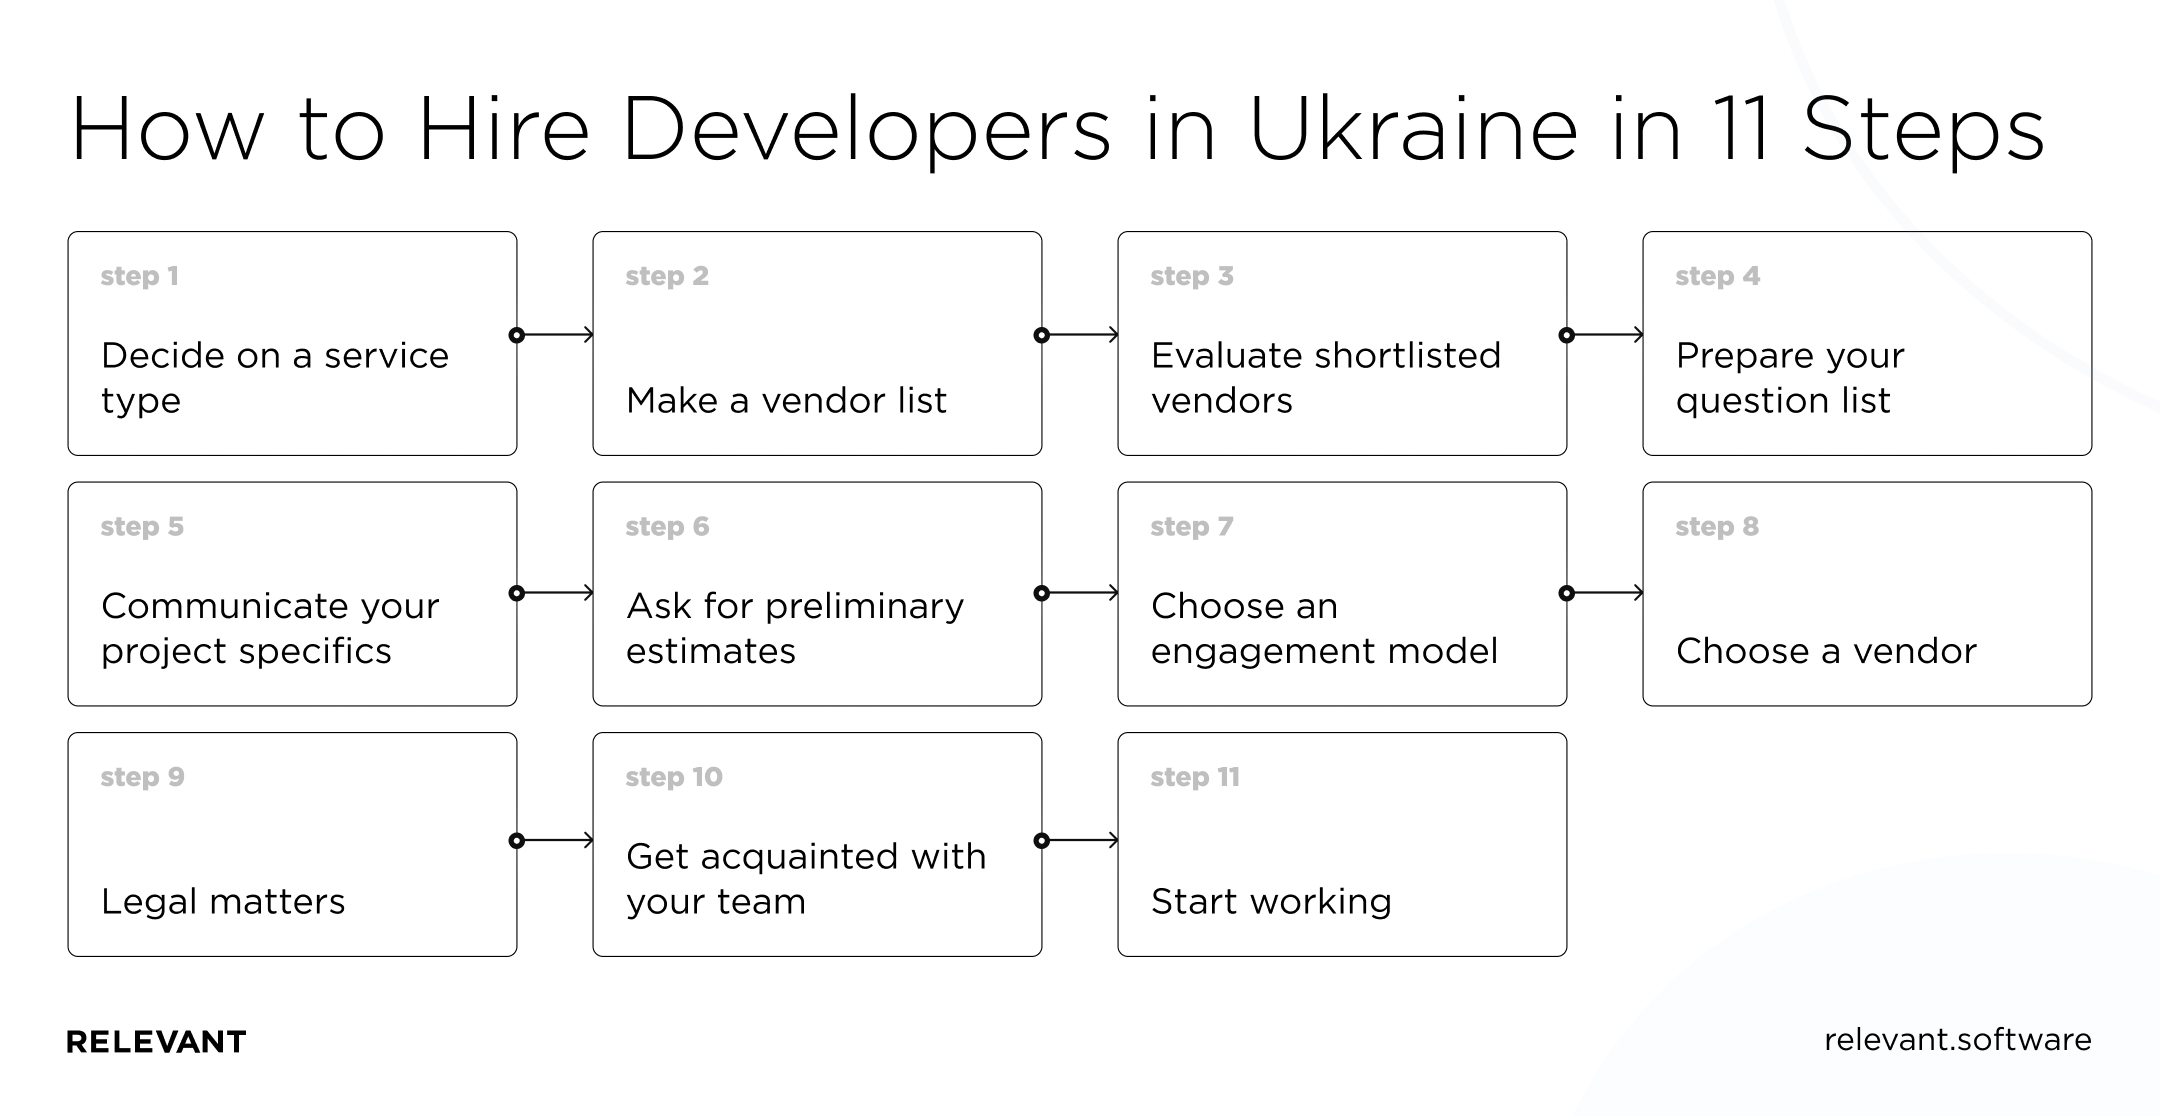 How to hire Ukrainian Developers in 11 steps